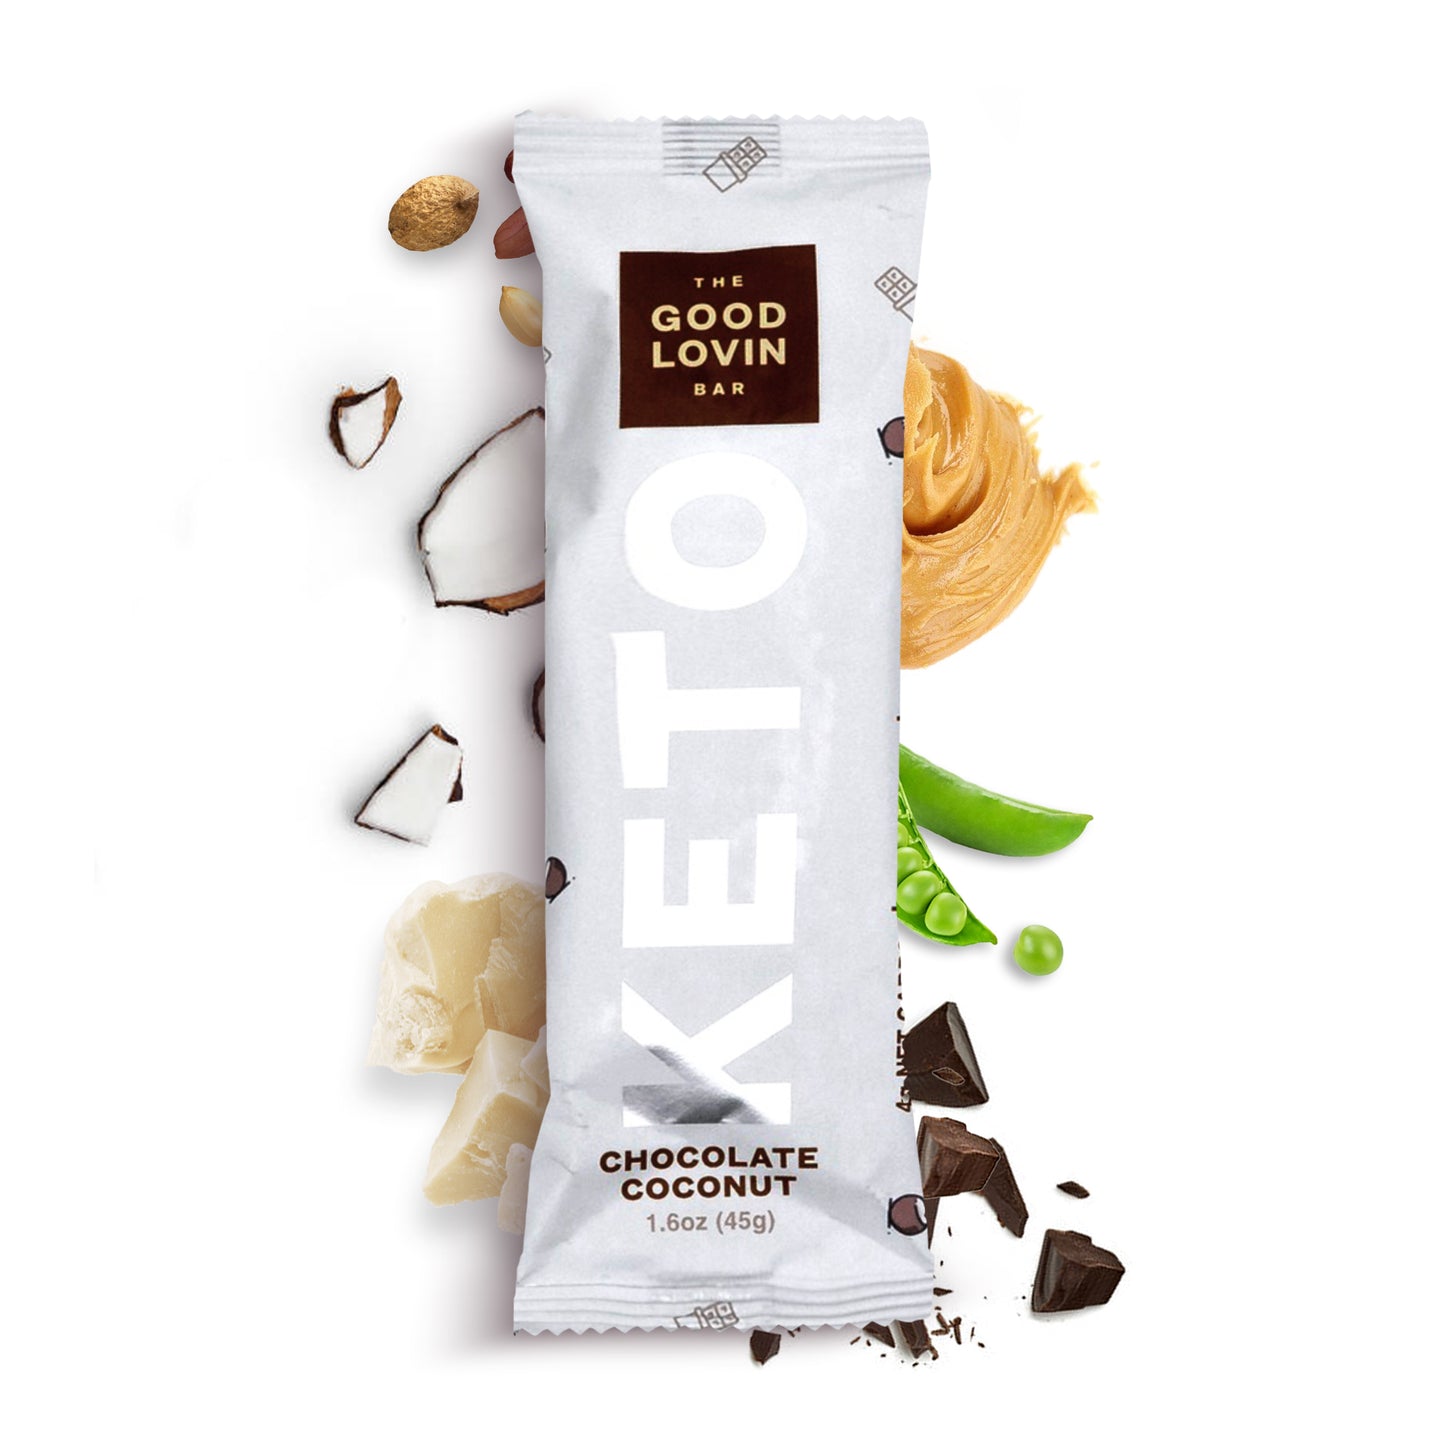 Short Life KETO BARS - 2 weeks to 3 months